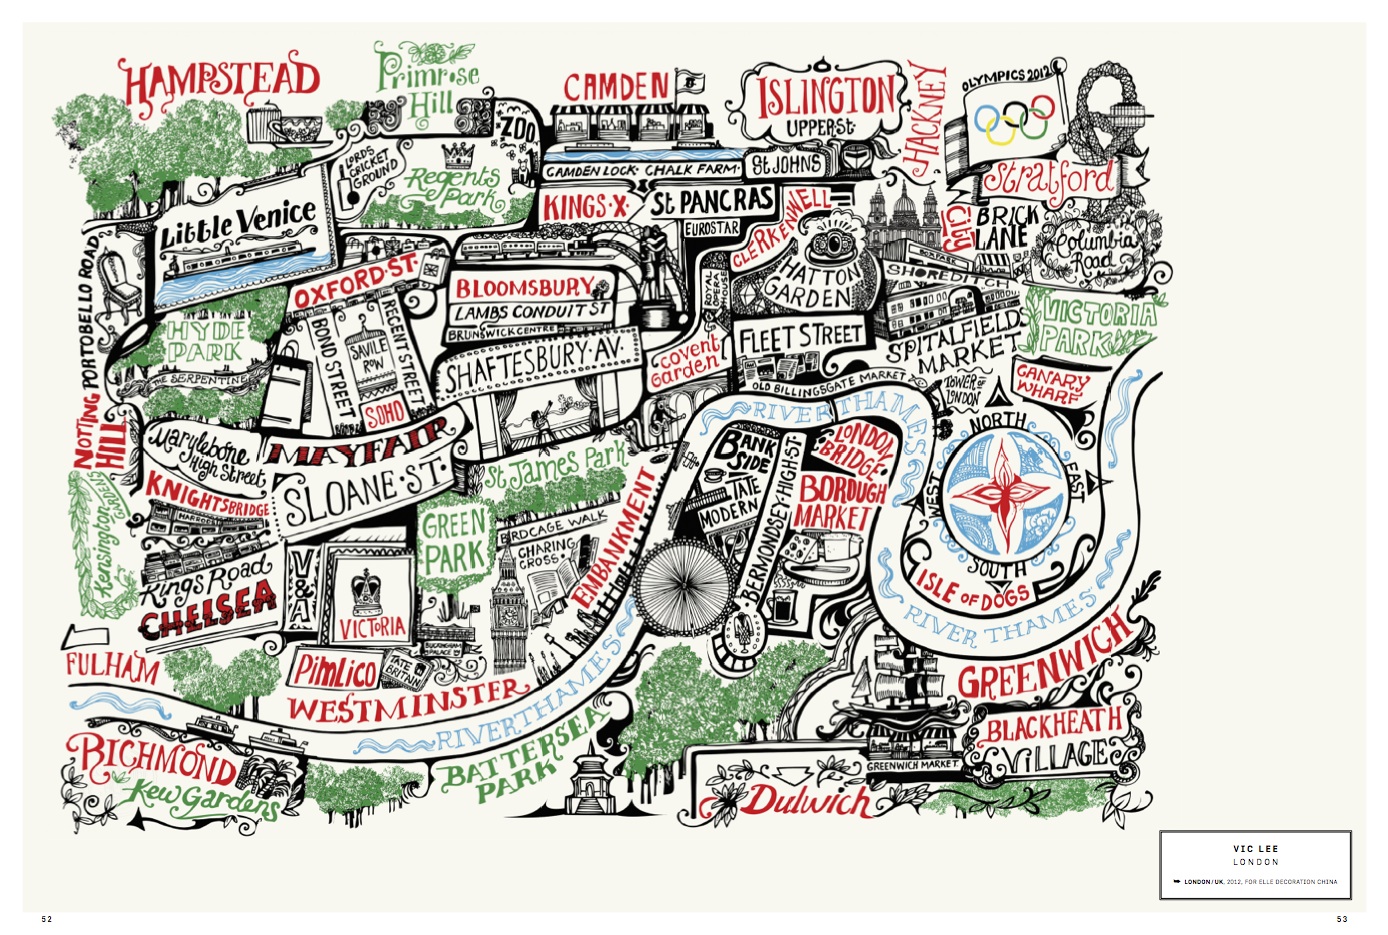 A Map of the World: The World According to Illustrators and Storytellers